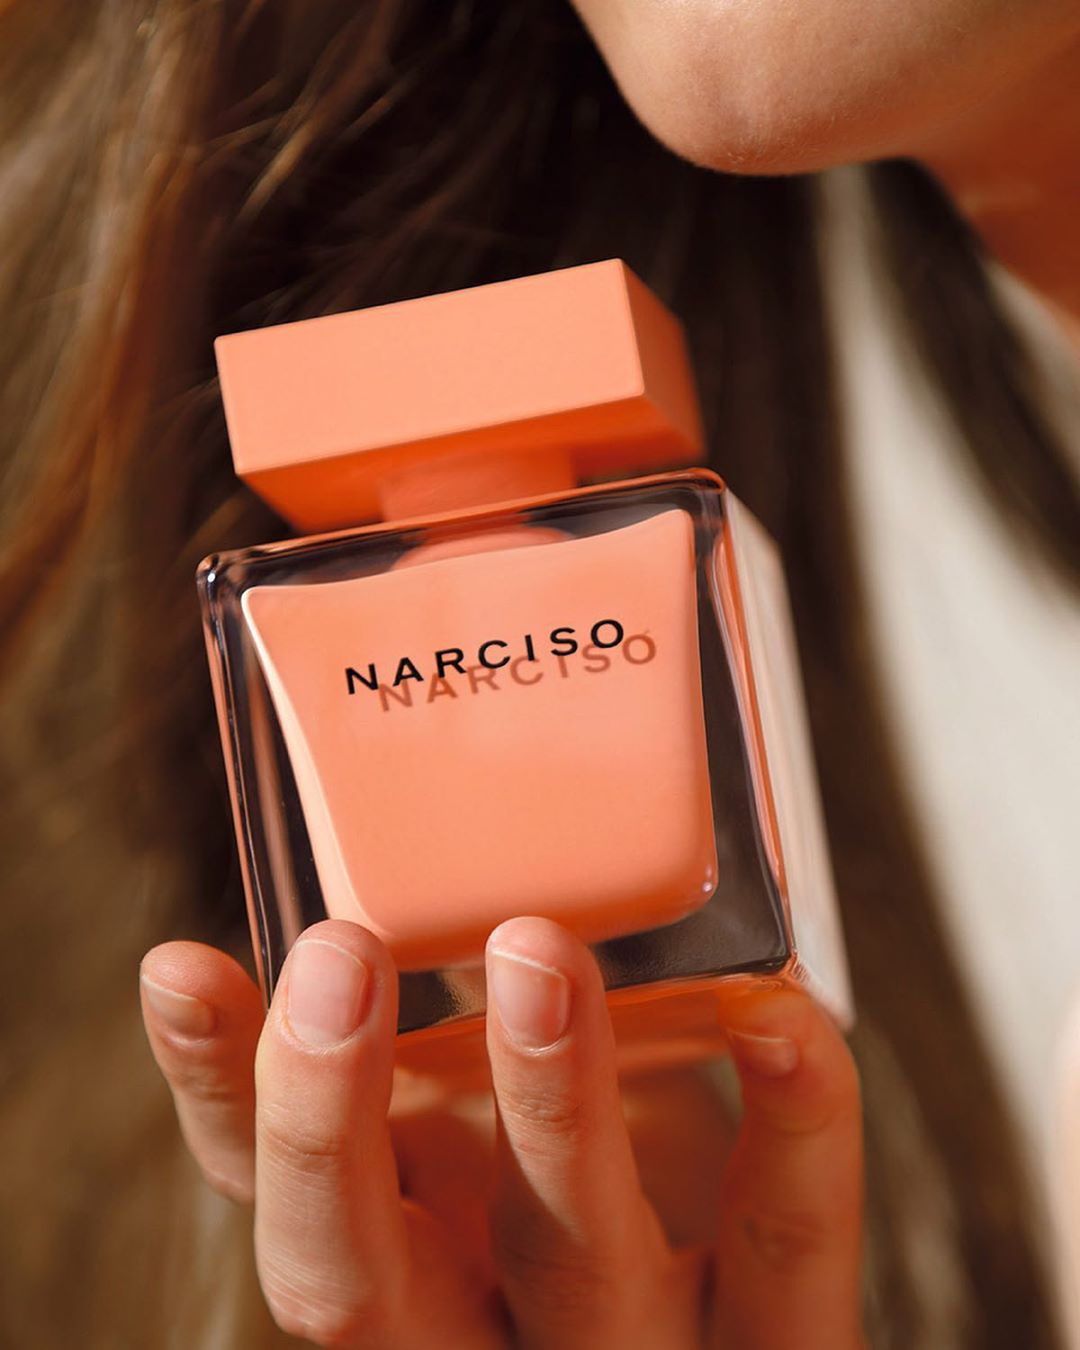 narciso rodriguez - NARCISO eau de parfum ambrée: a sultry heart of musc enveloped by radiant florals and a hint of the sun.
#NARCISO #narcisoambree #myambree #narcisorodriguezparfums #parfum #fragran...